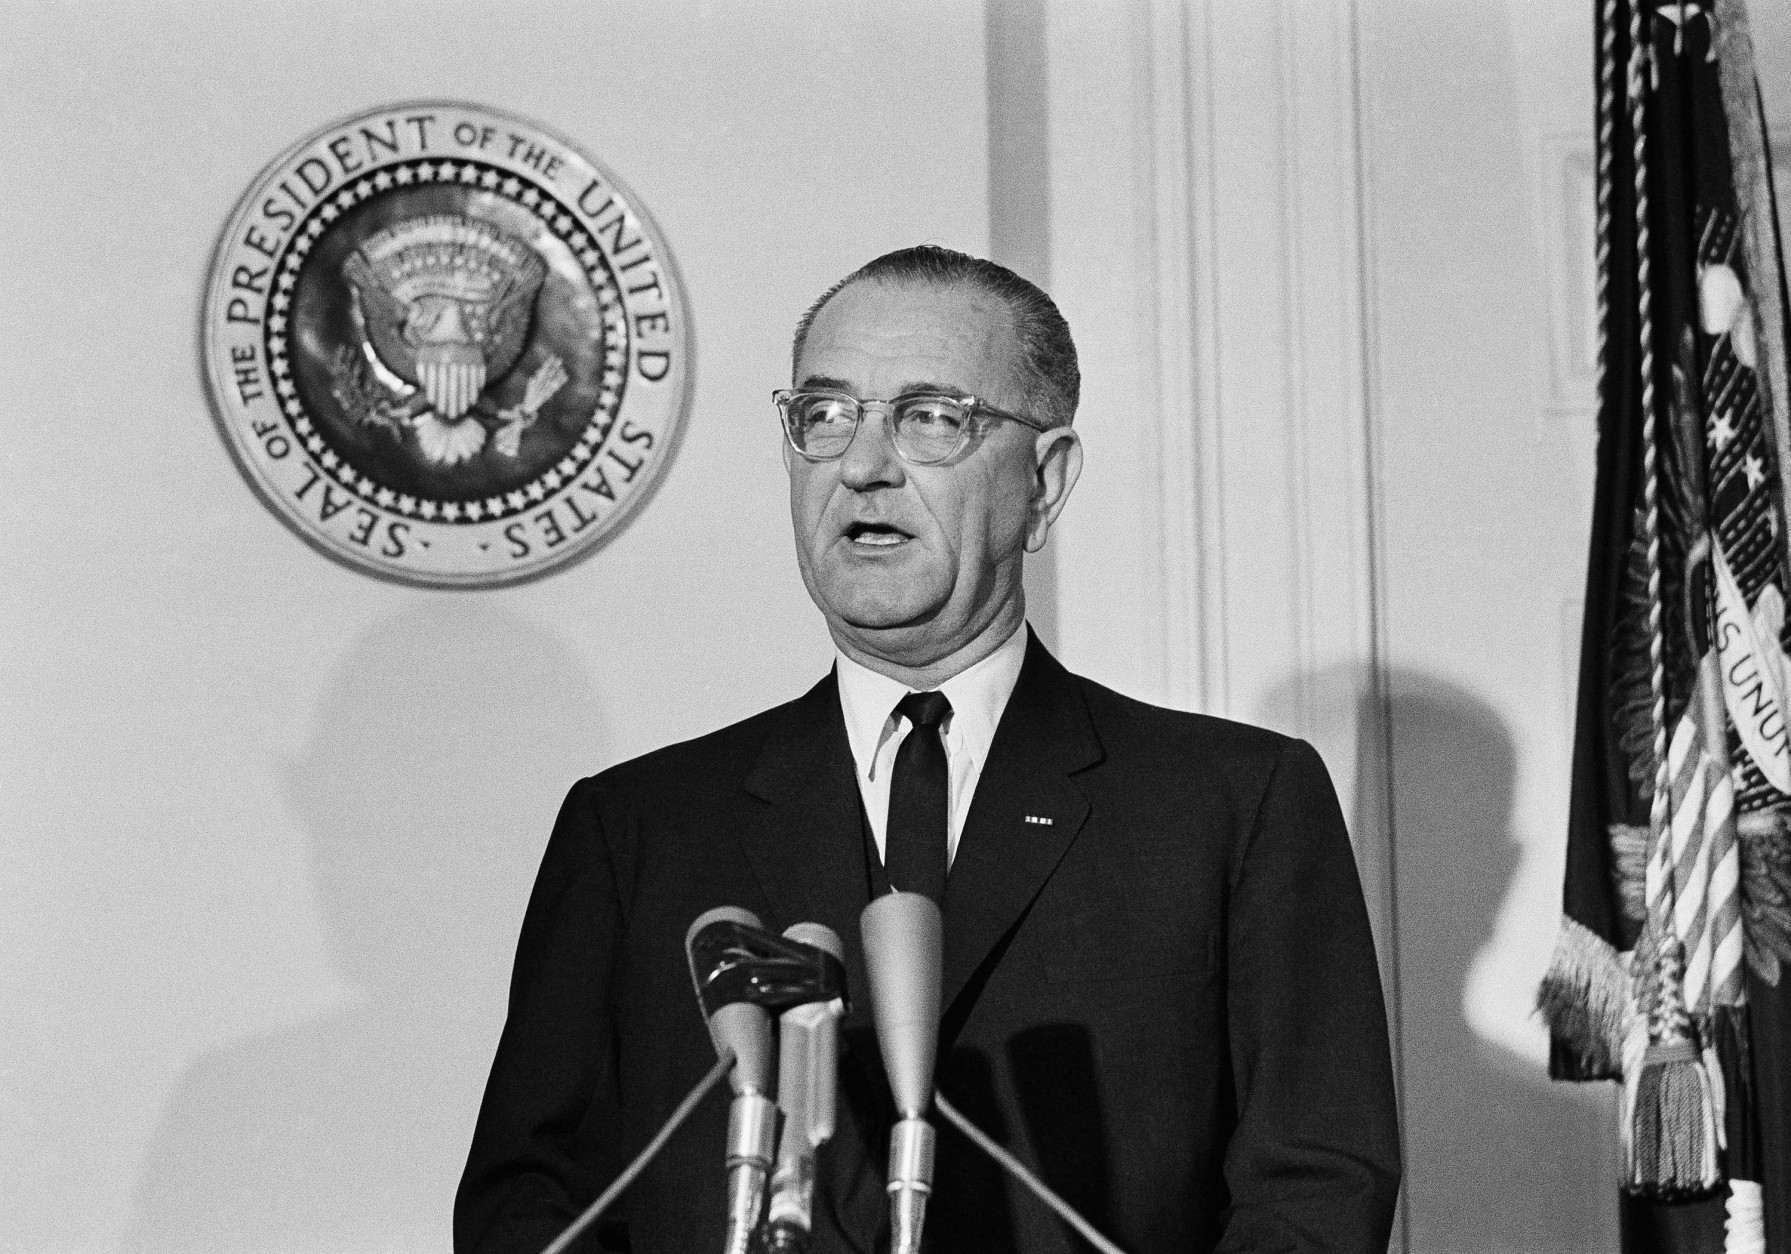 U.S. President  Lyndon Johnson makes his first formal address to the American people as their new chief executive, speaking from the Fish Room in the White House November 23, 1963 over a television-hookup.   Johnson proclaimed Monday as a day of mourning for the assassinated President John F. Kennedy.   The seal of the President of the United States is at left. (AP Photo)